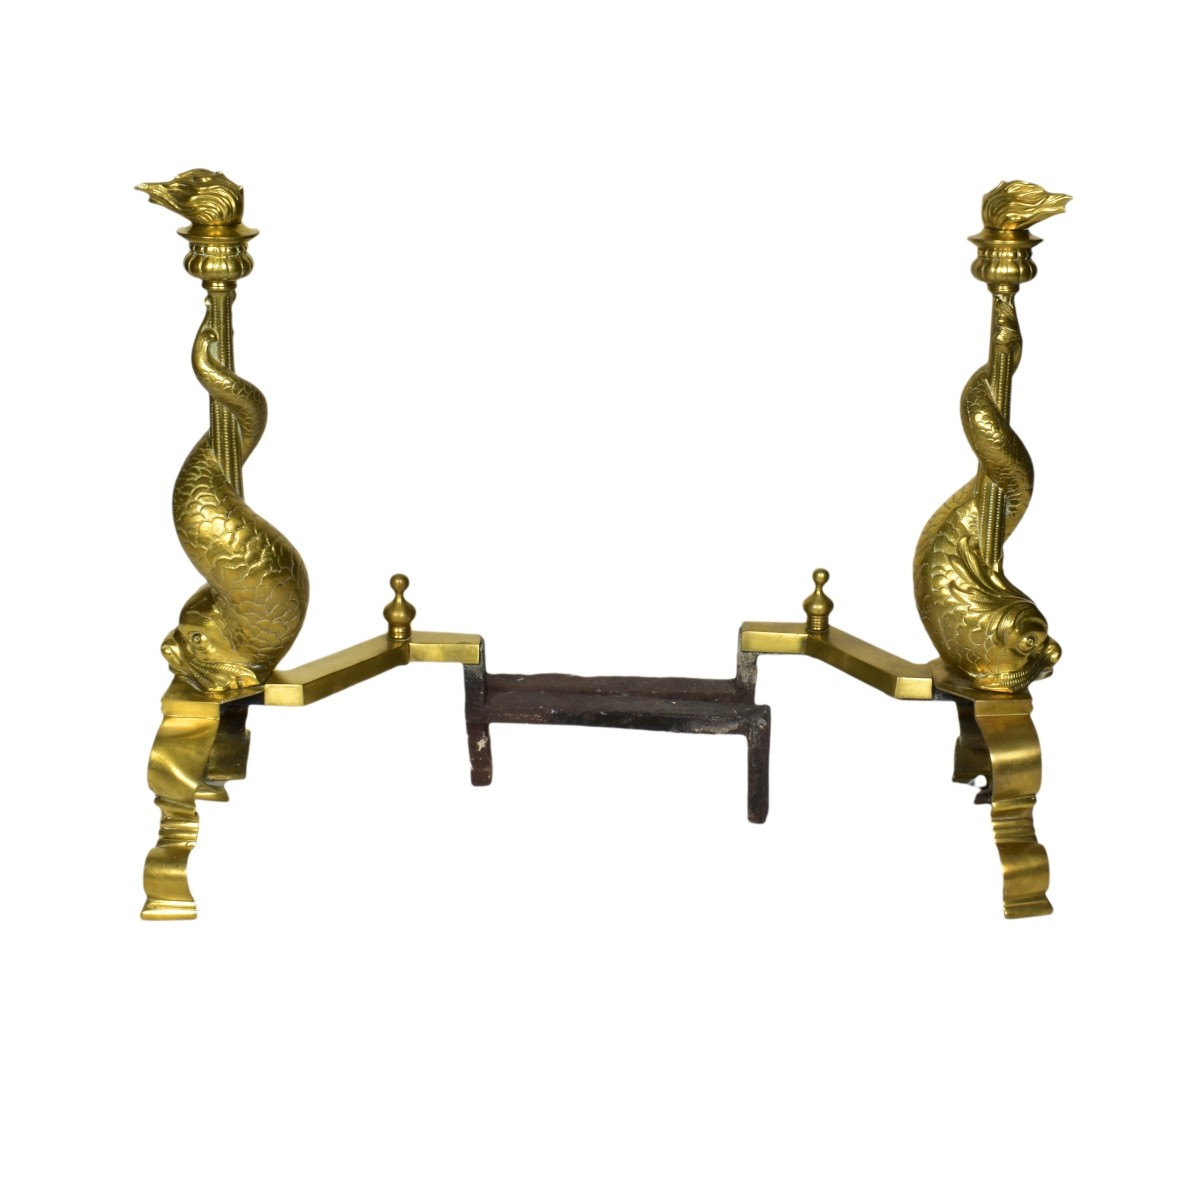 Pair of 19th C. Empire Style Chenets